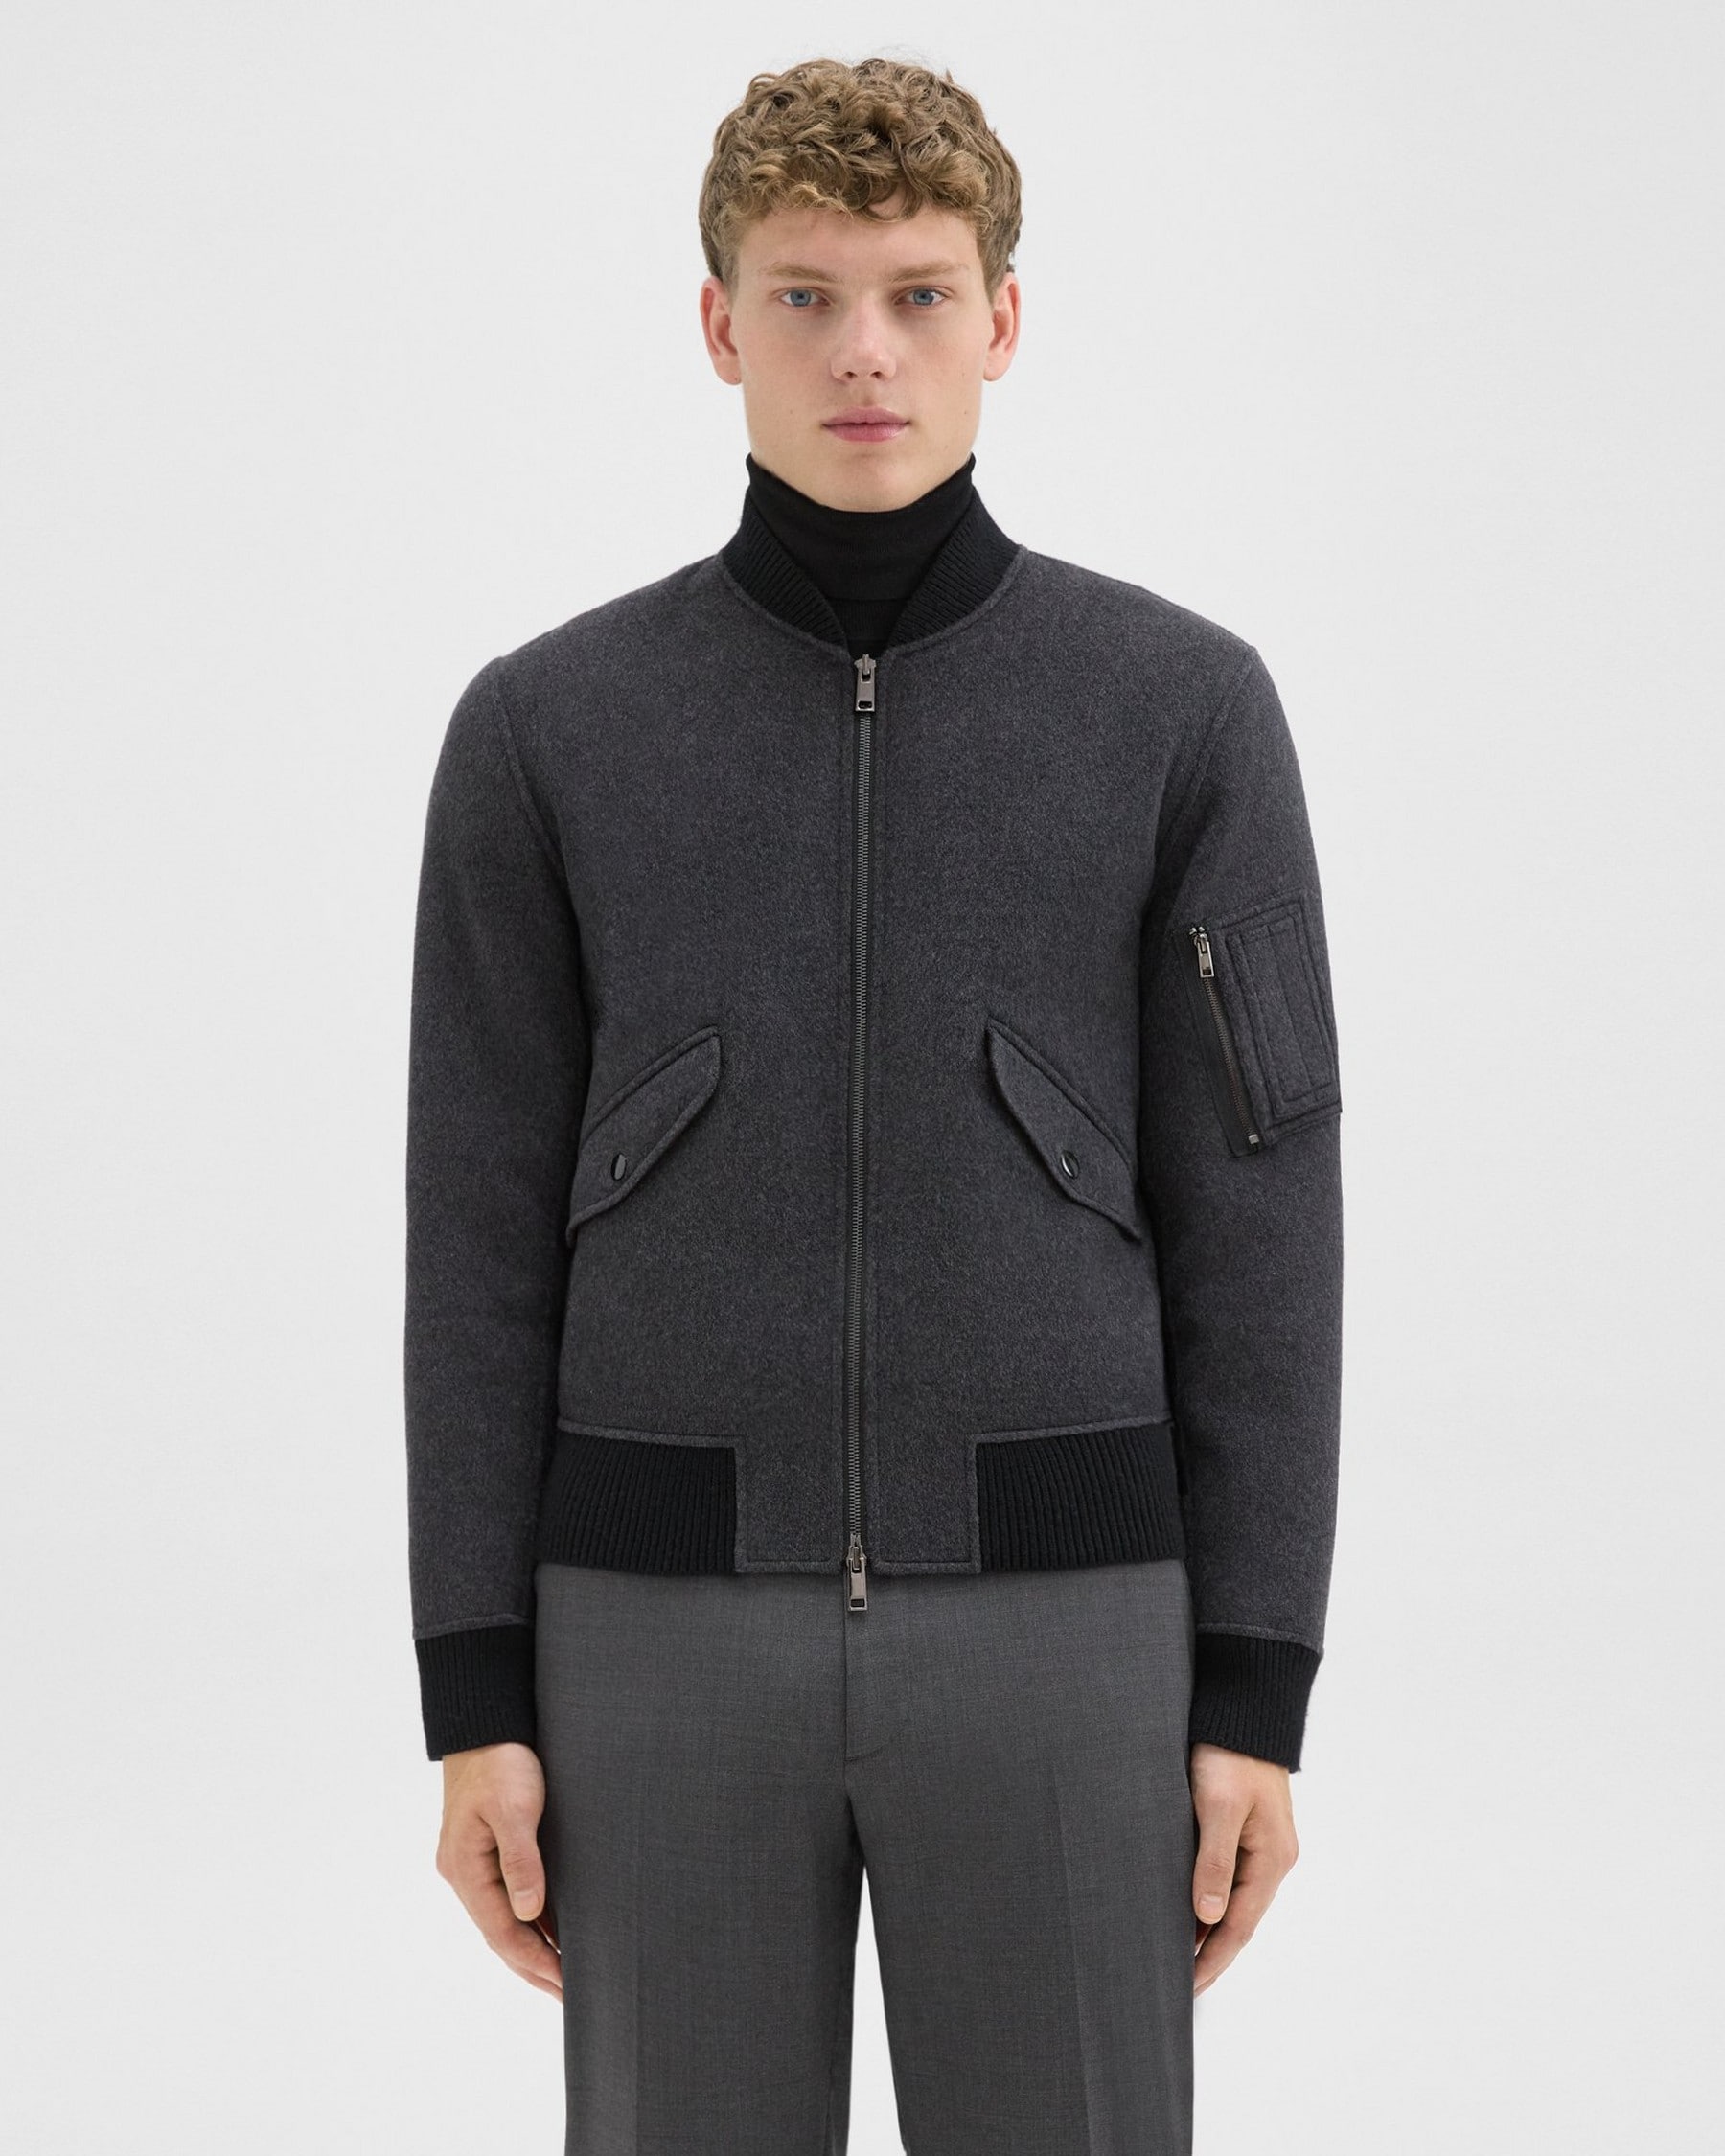 Theory Flight Bomber Jacket in Double-Face Wool-Cashmere